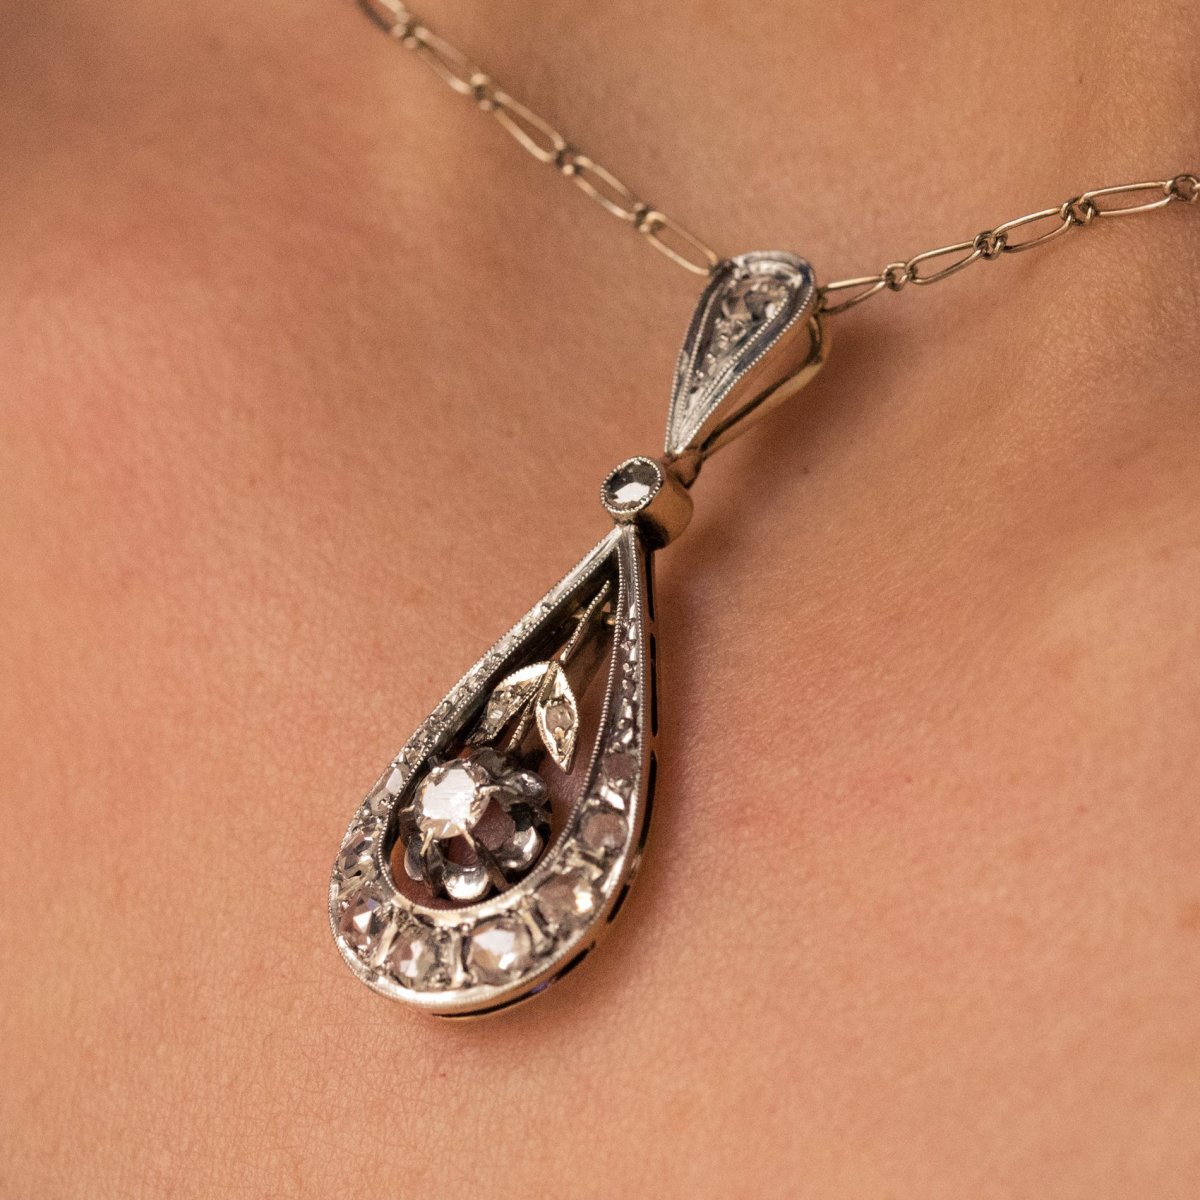 Pendant With Ancient Diamonds And Its Chain-photo-1